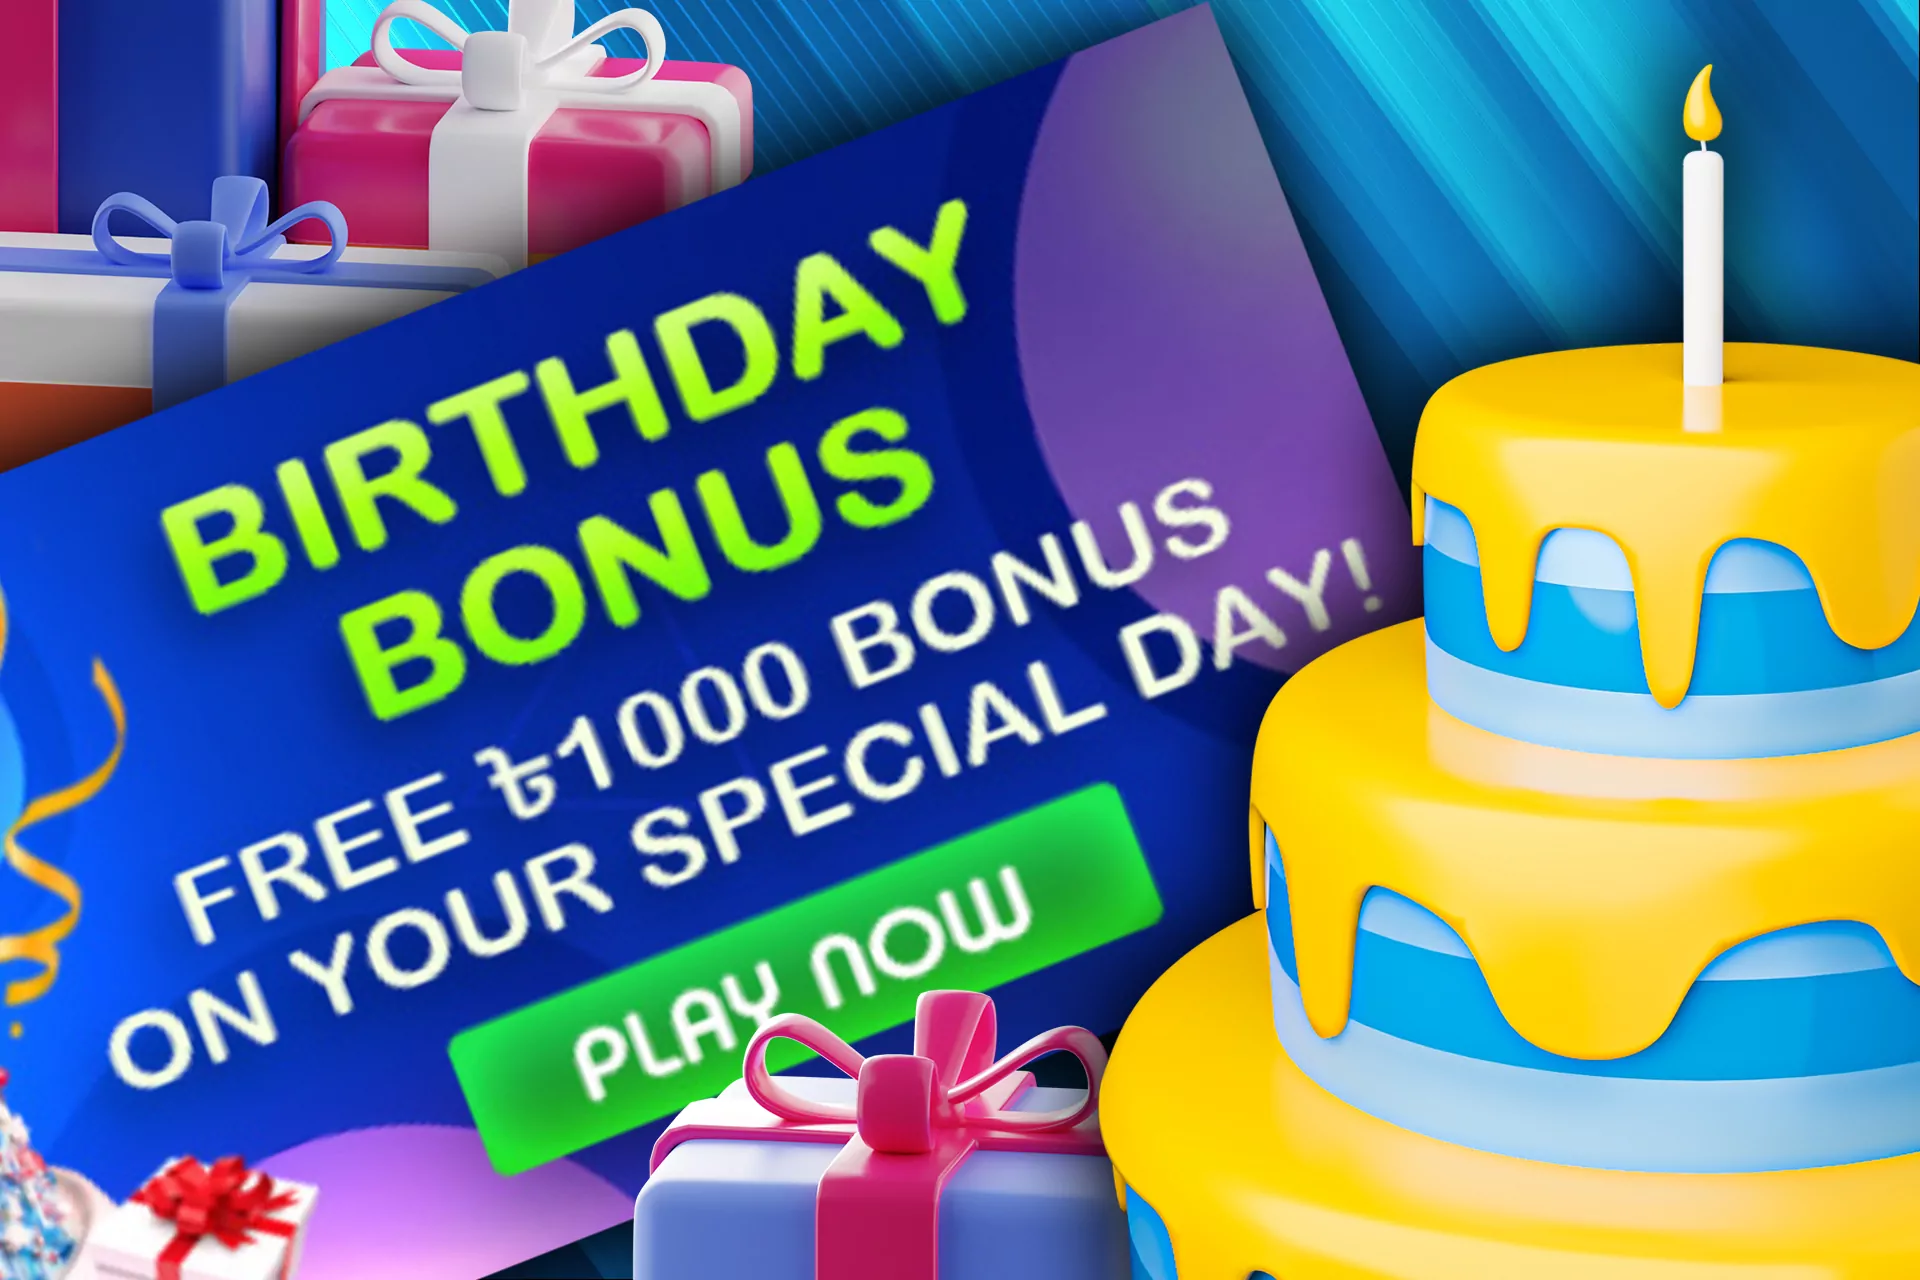 On your birthday you can receive a 1000 BDT bonus from Crickex.